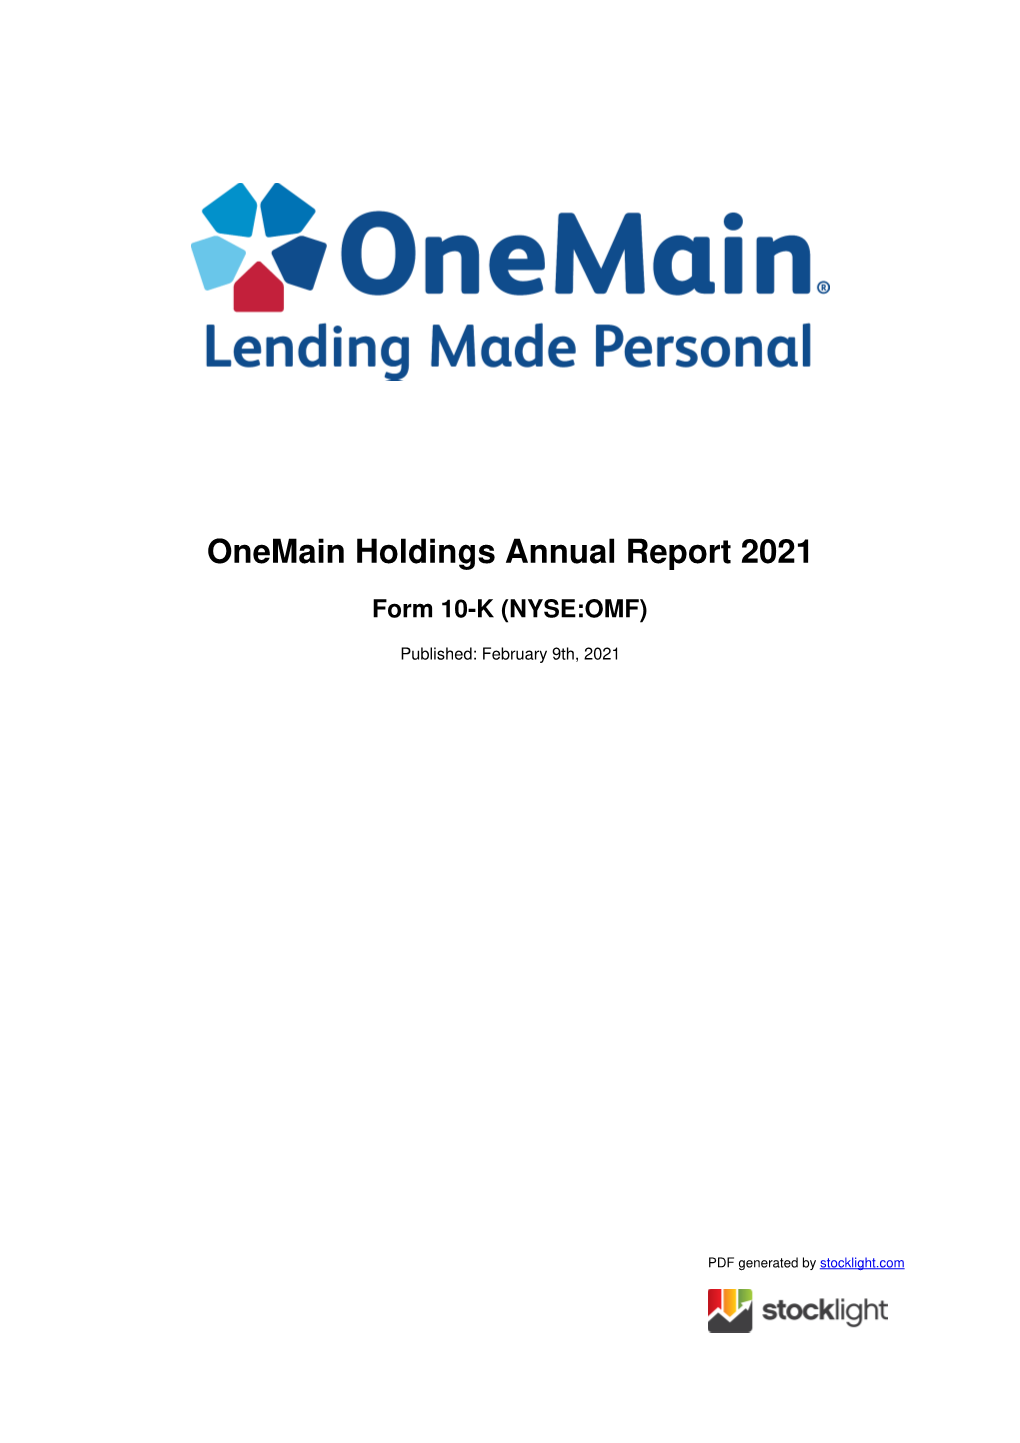 Onemain Holdings Annual Report 2021